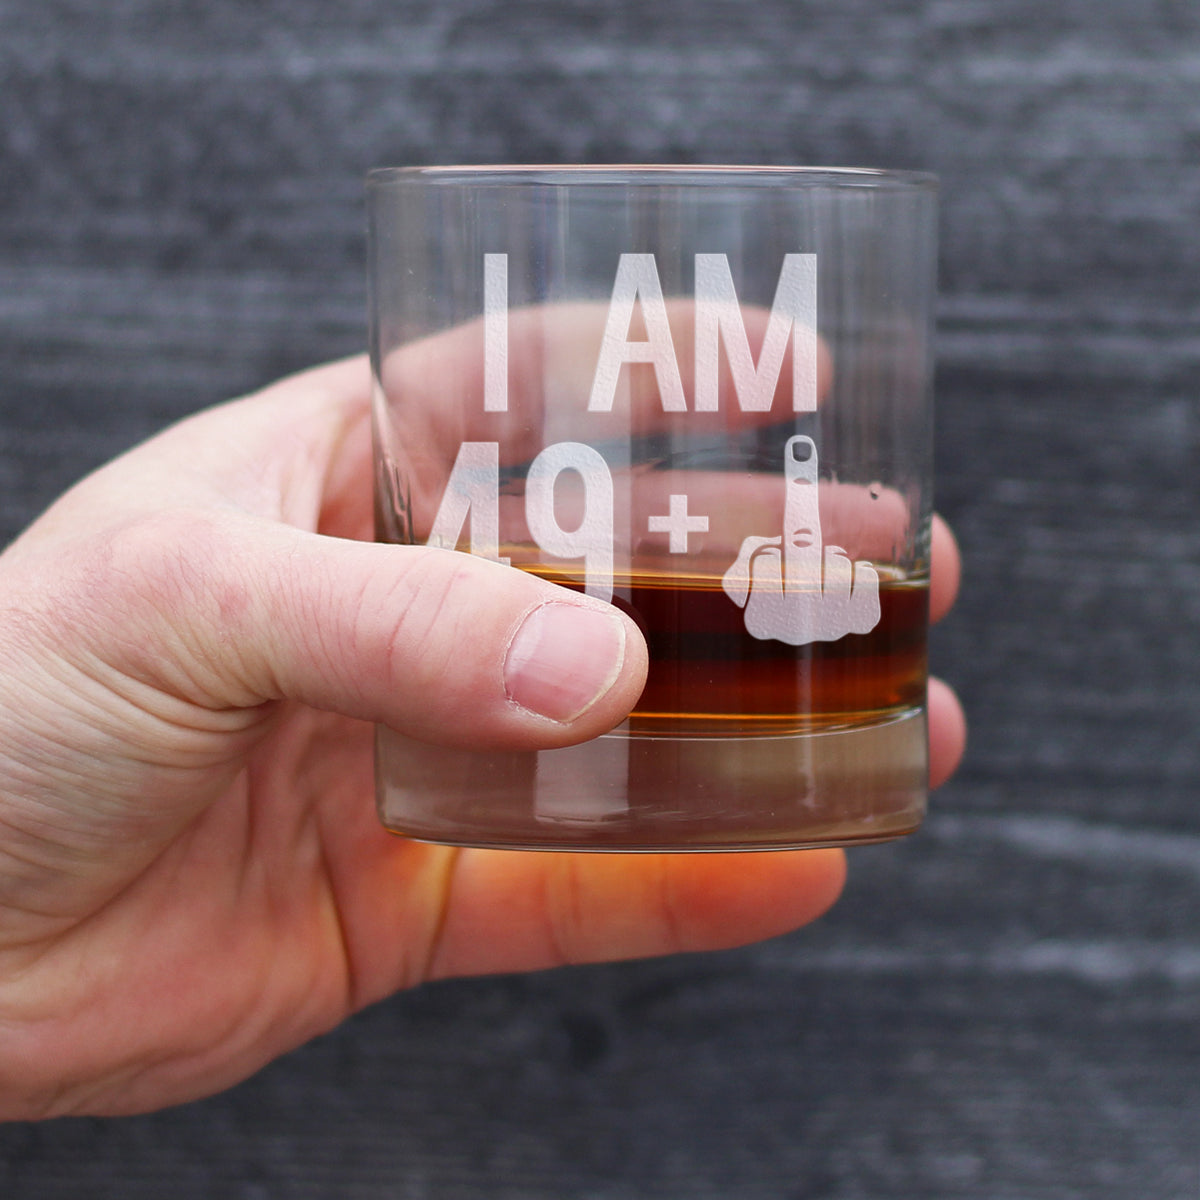 49 + 1 Middle Finger - Funny 50th Birthday Whiskey Rocks Glass Gifts for Men &amp; Women Turning 50 - Fun Whisky Drinking Tumbler